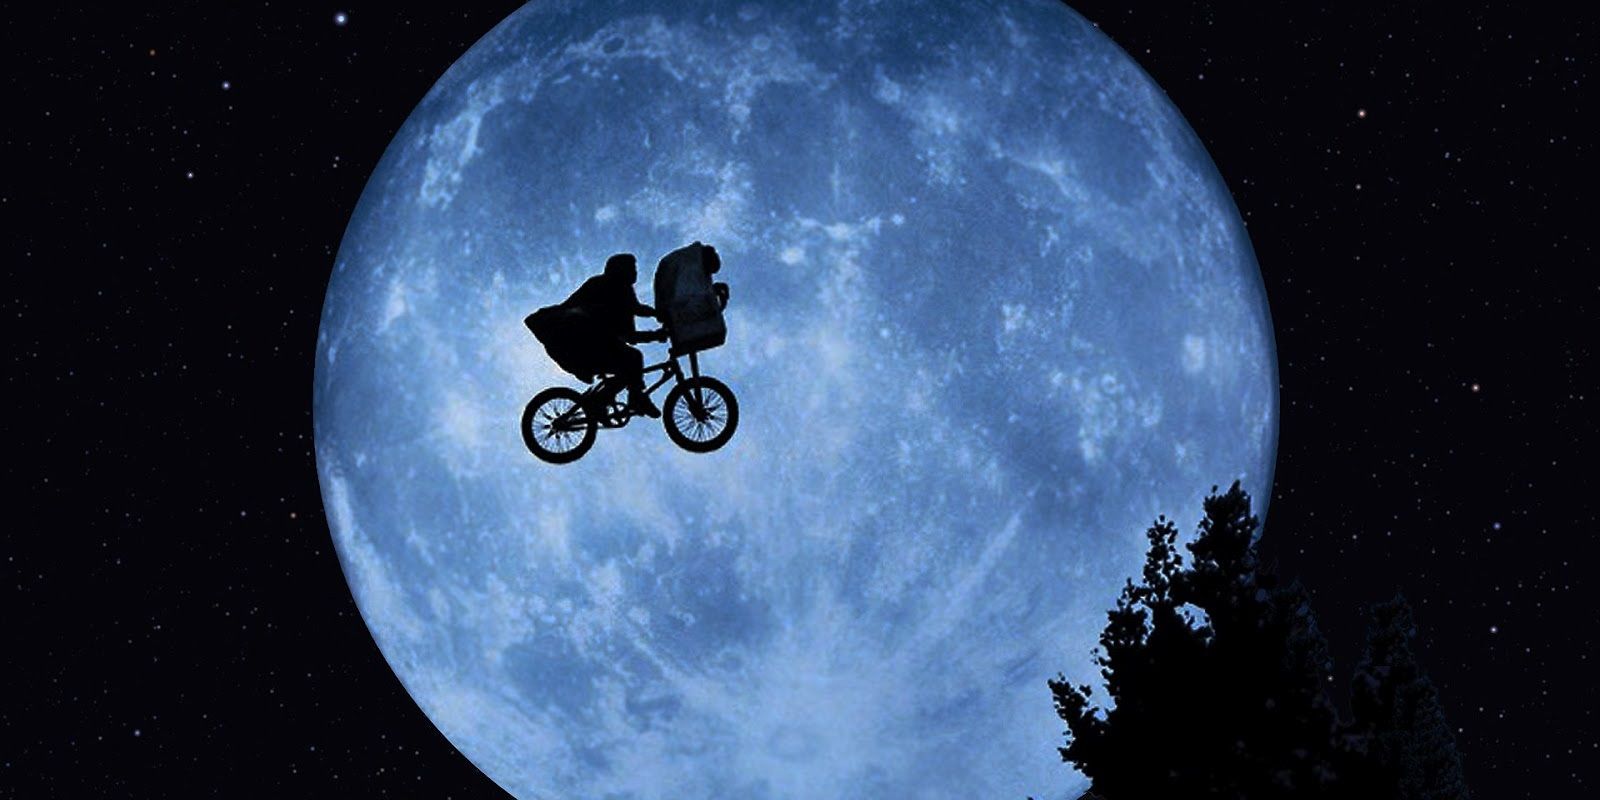 Elliott and ET fly past the moon in ET the Extra-Terrestrial